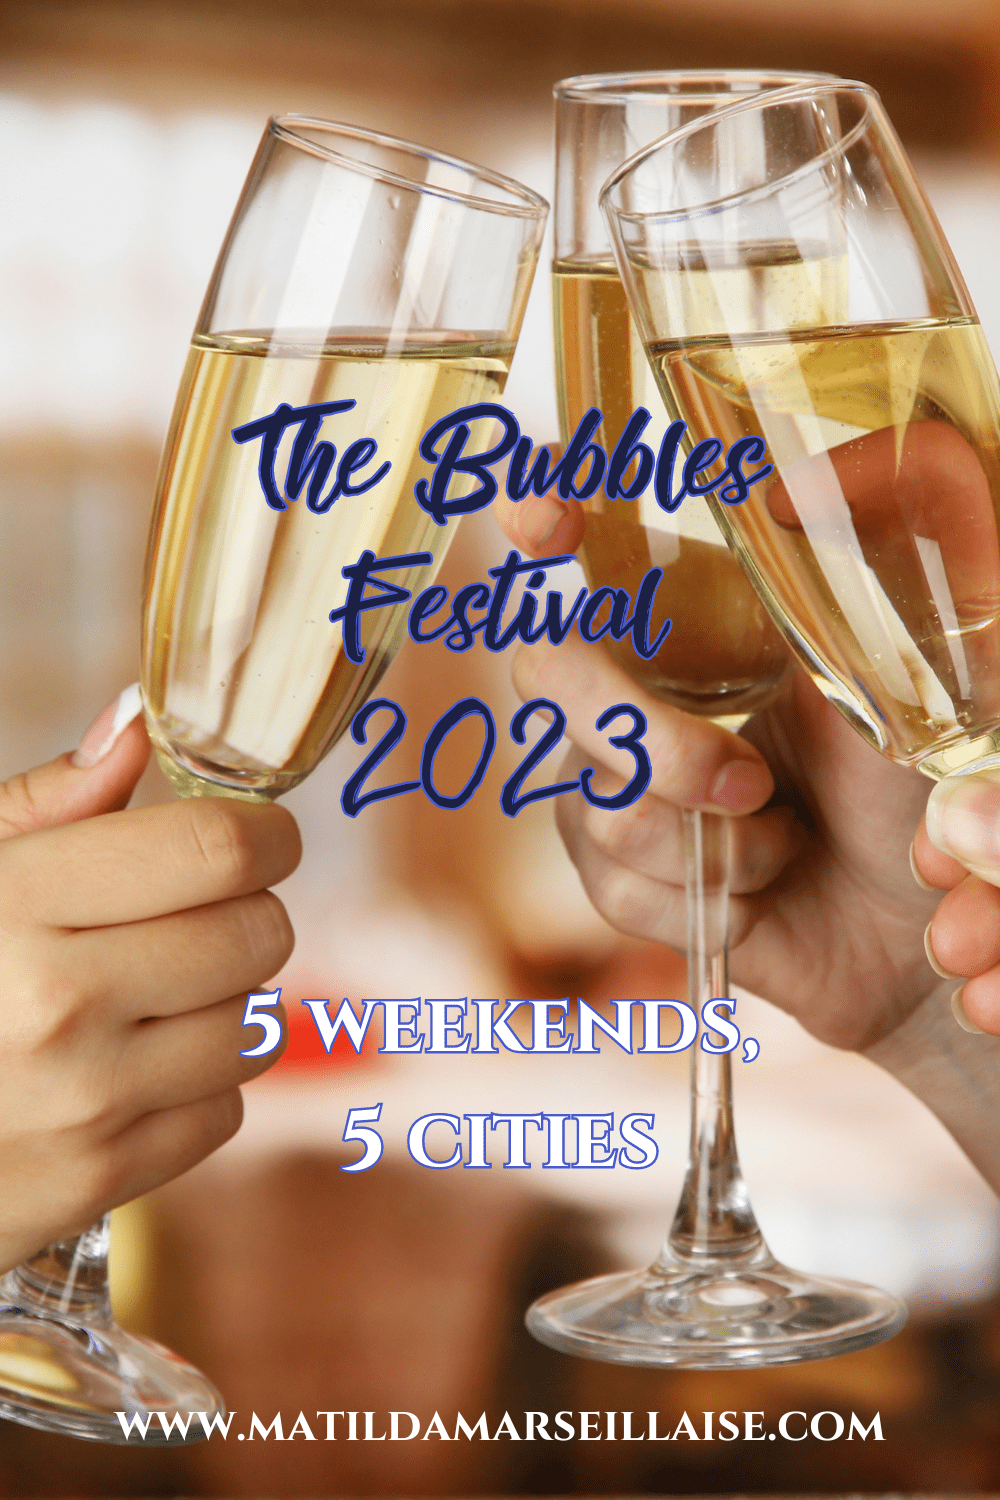 The Bubbles Festival 2023 tours 5 Australian cities over 5 weekends